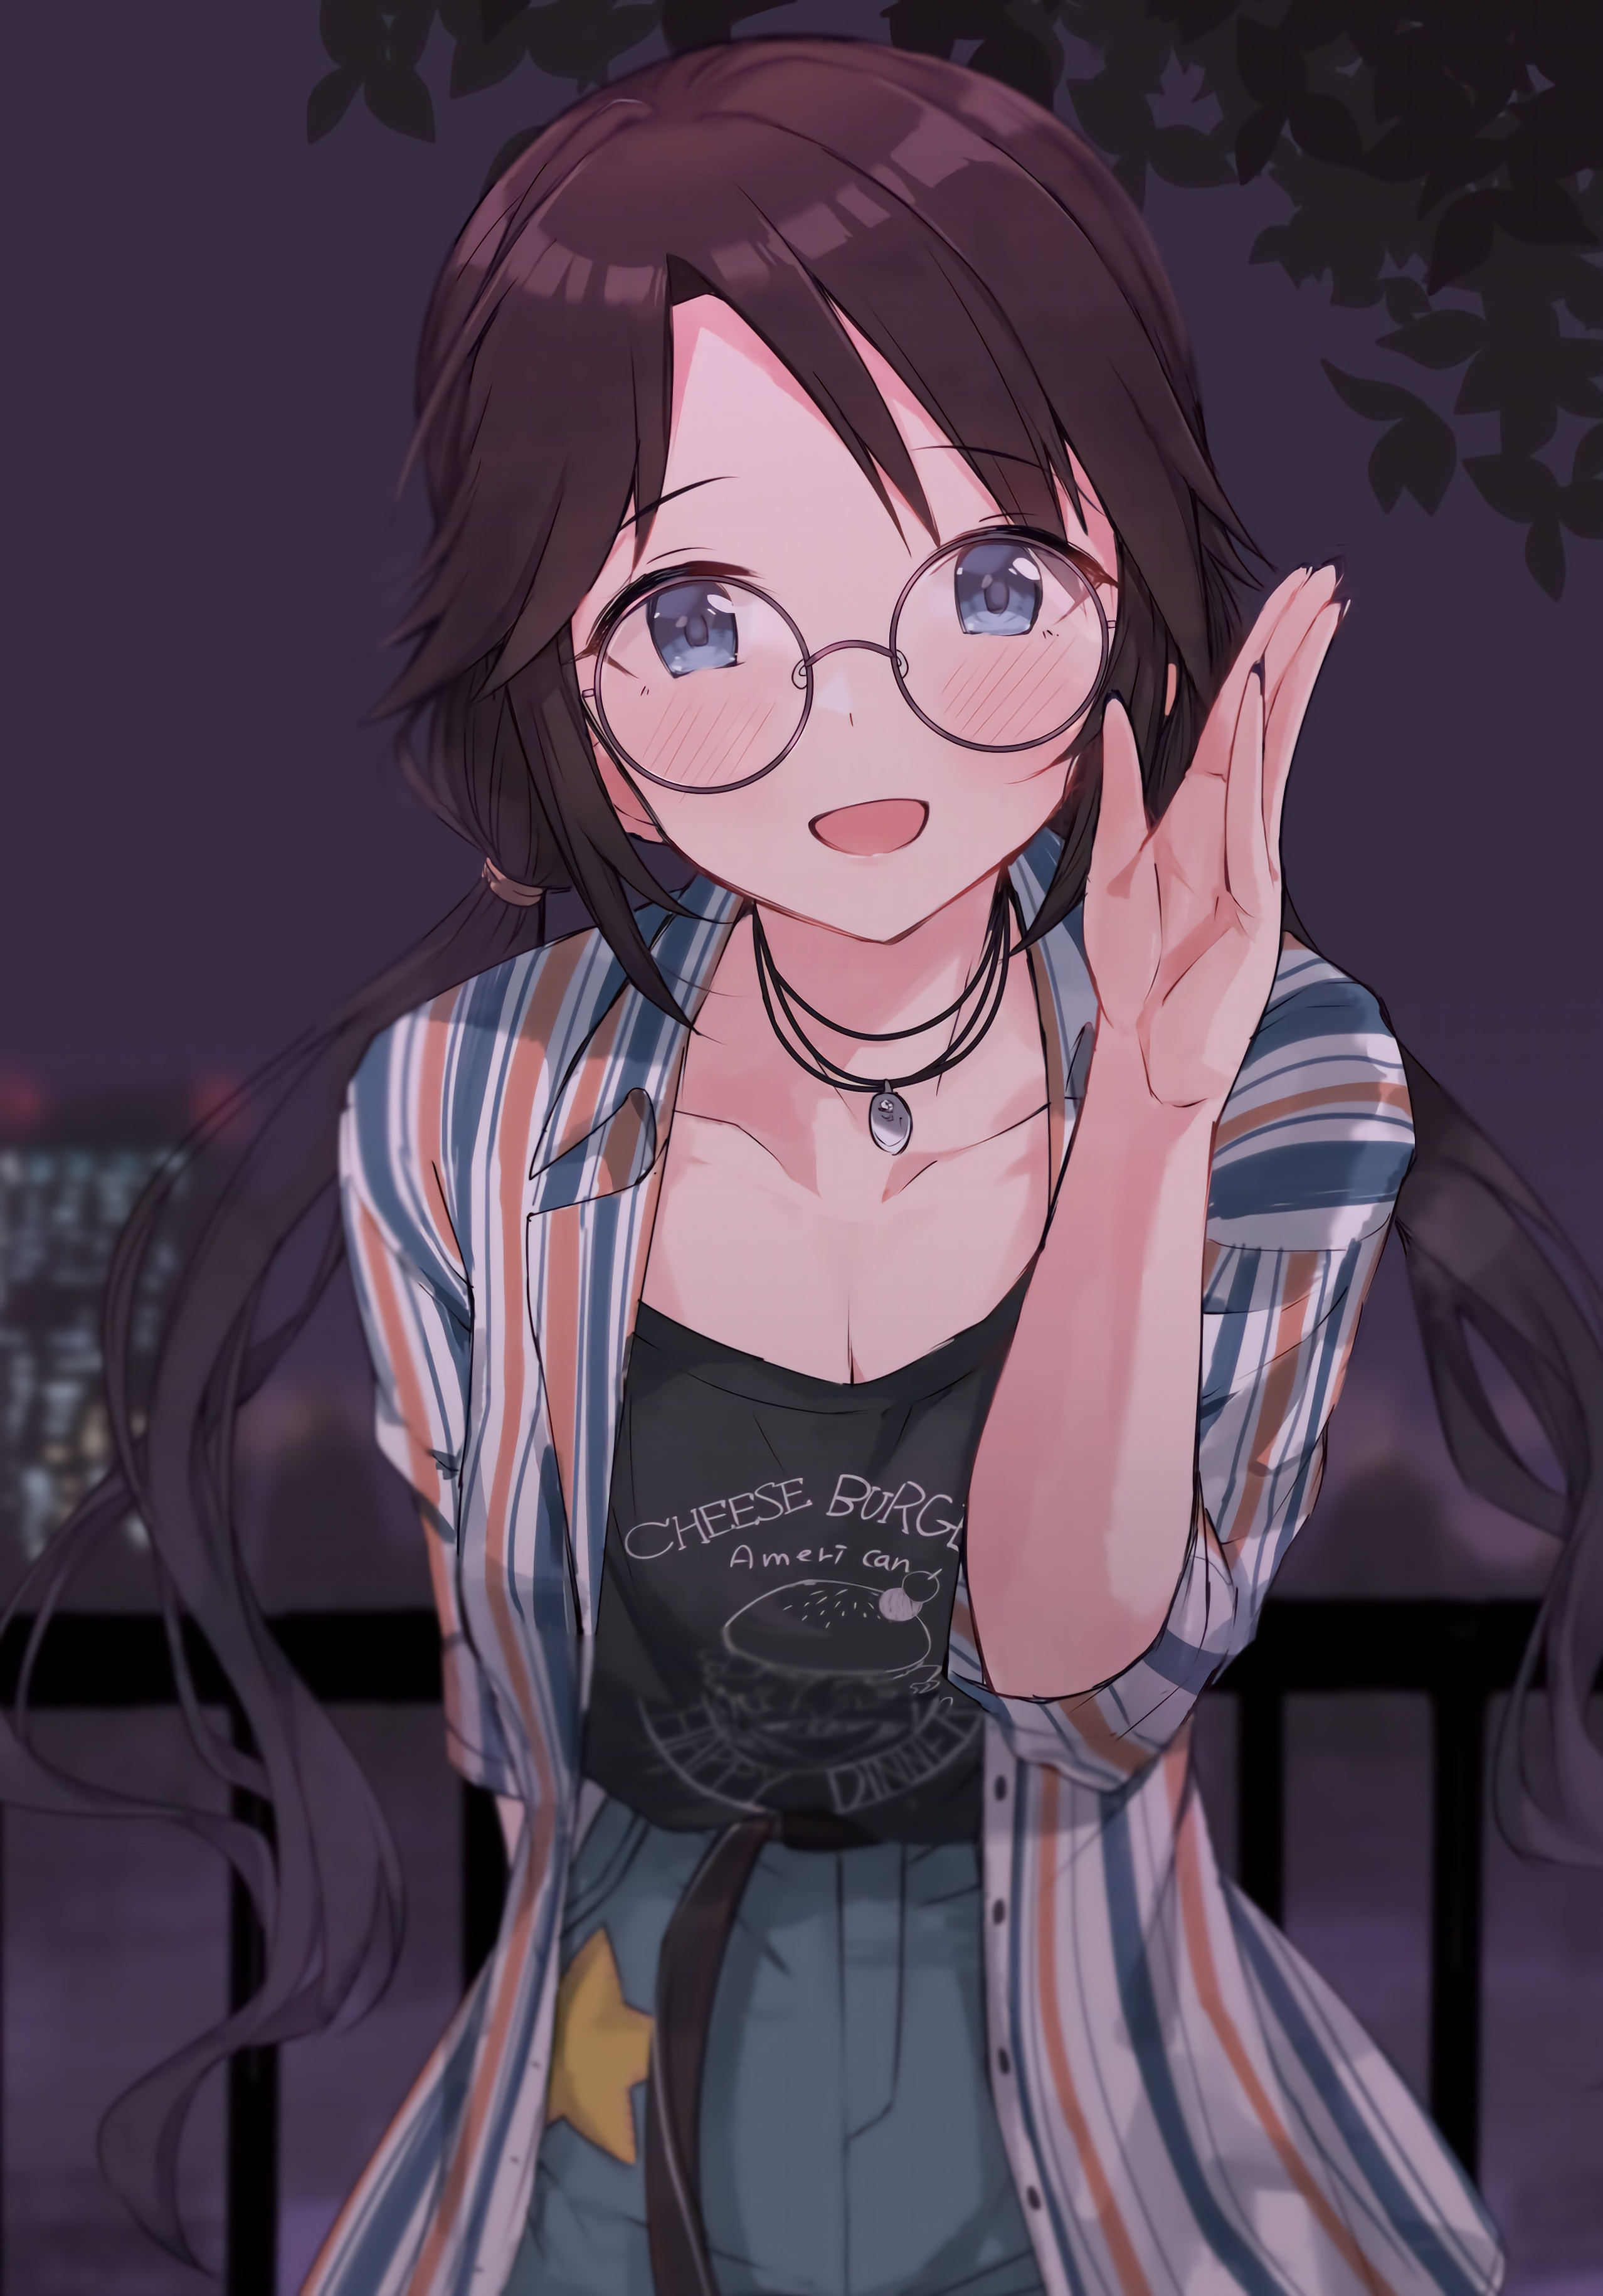 Anime 2556x3660 anime anime girls digital art 2D portrait display glasses blue eyes brunette purple background necklace petite ponytail outdoors city painted nails artwork Hanetsuka dark hair portrait looking at viewer blushing